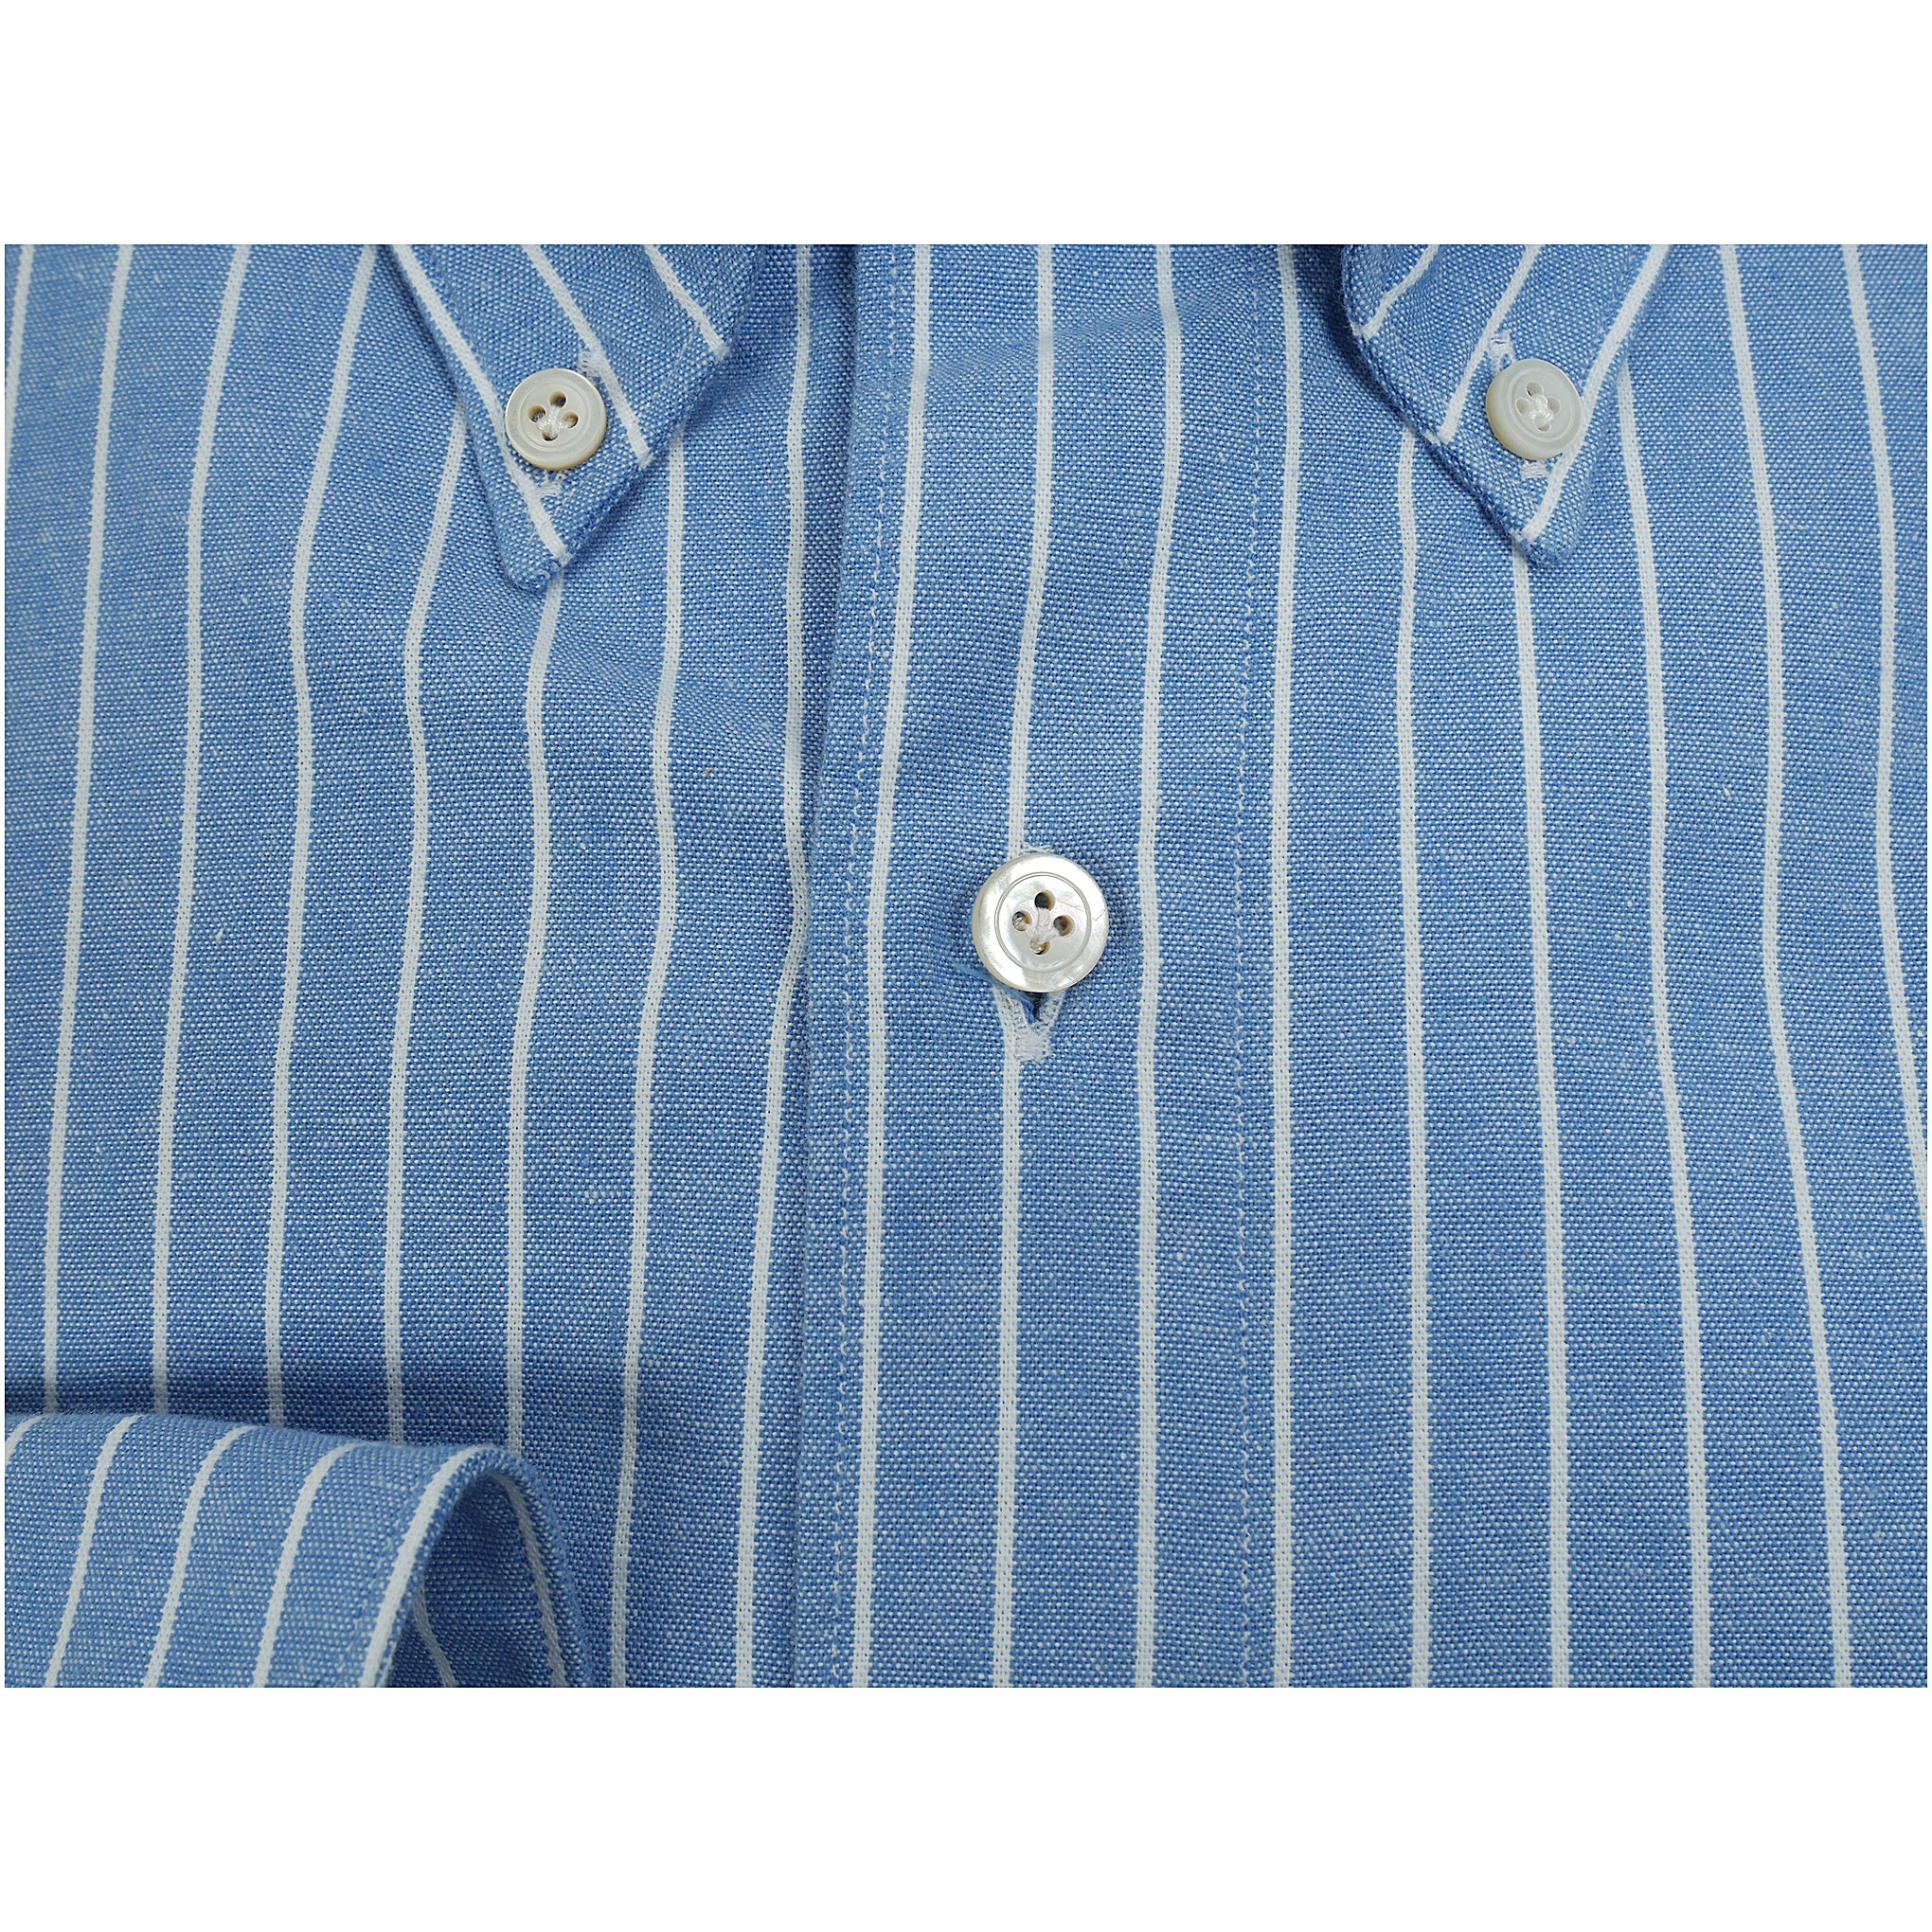 Sports shirt button-down tokyo in blue, pink or beige pinstriped chambray